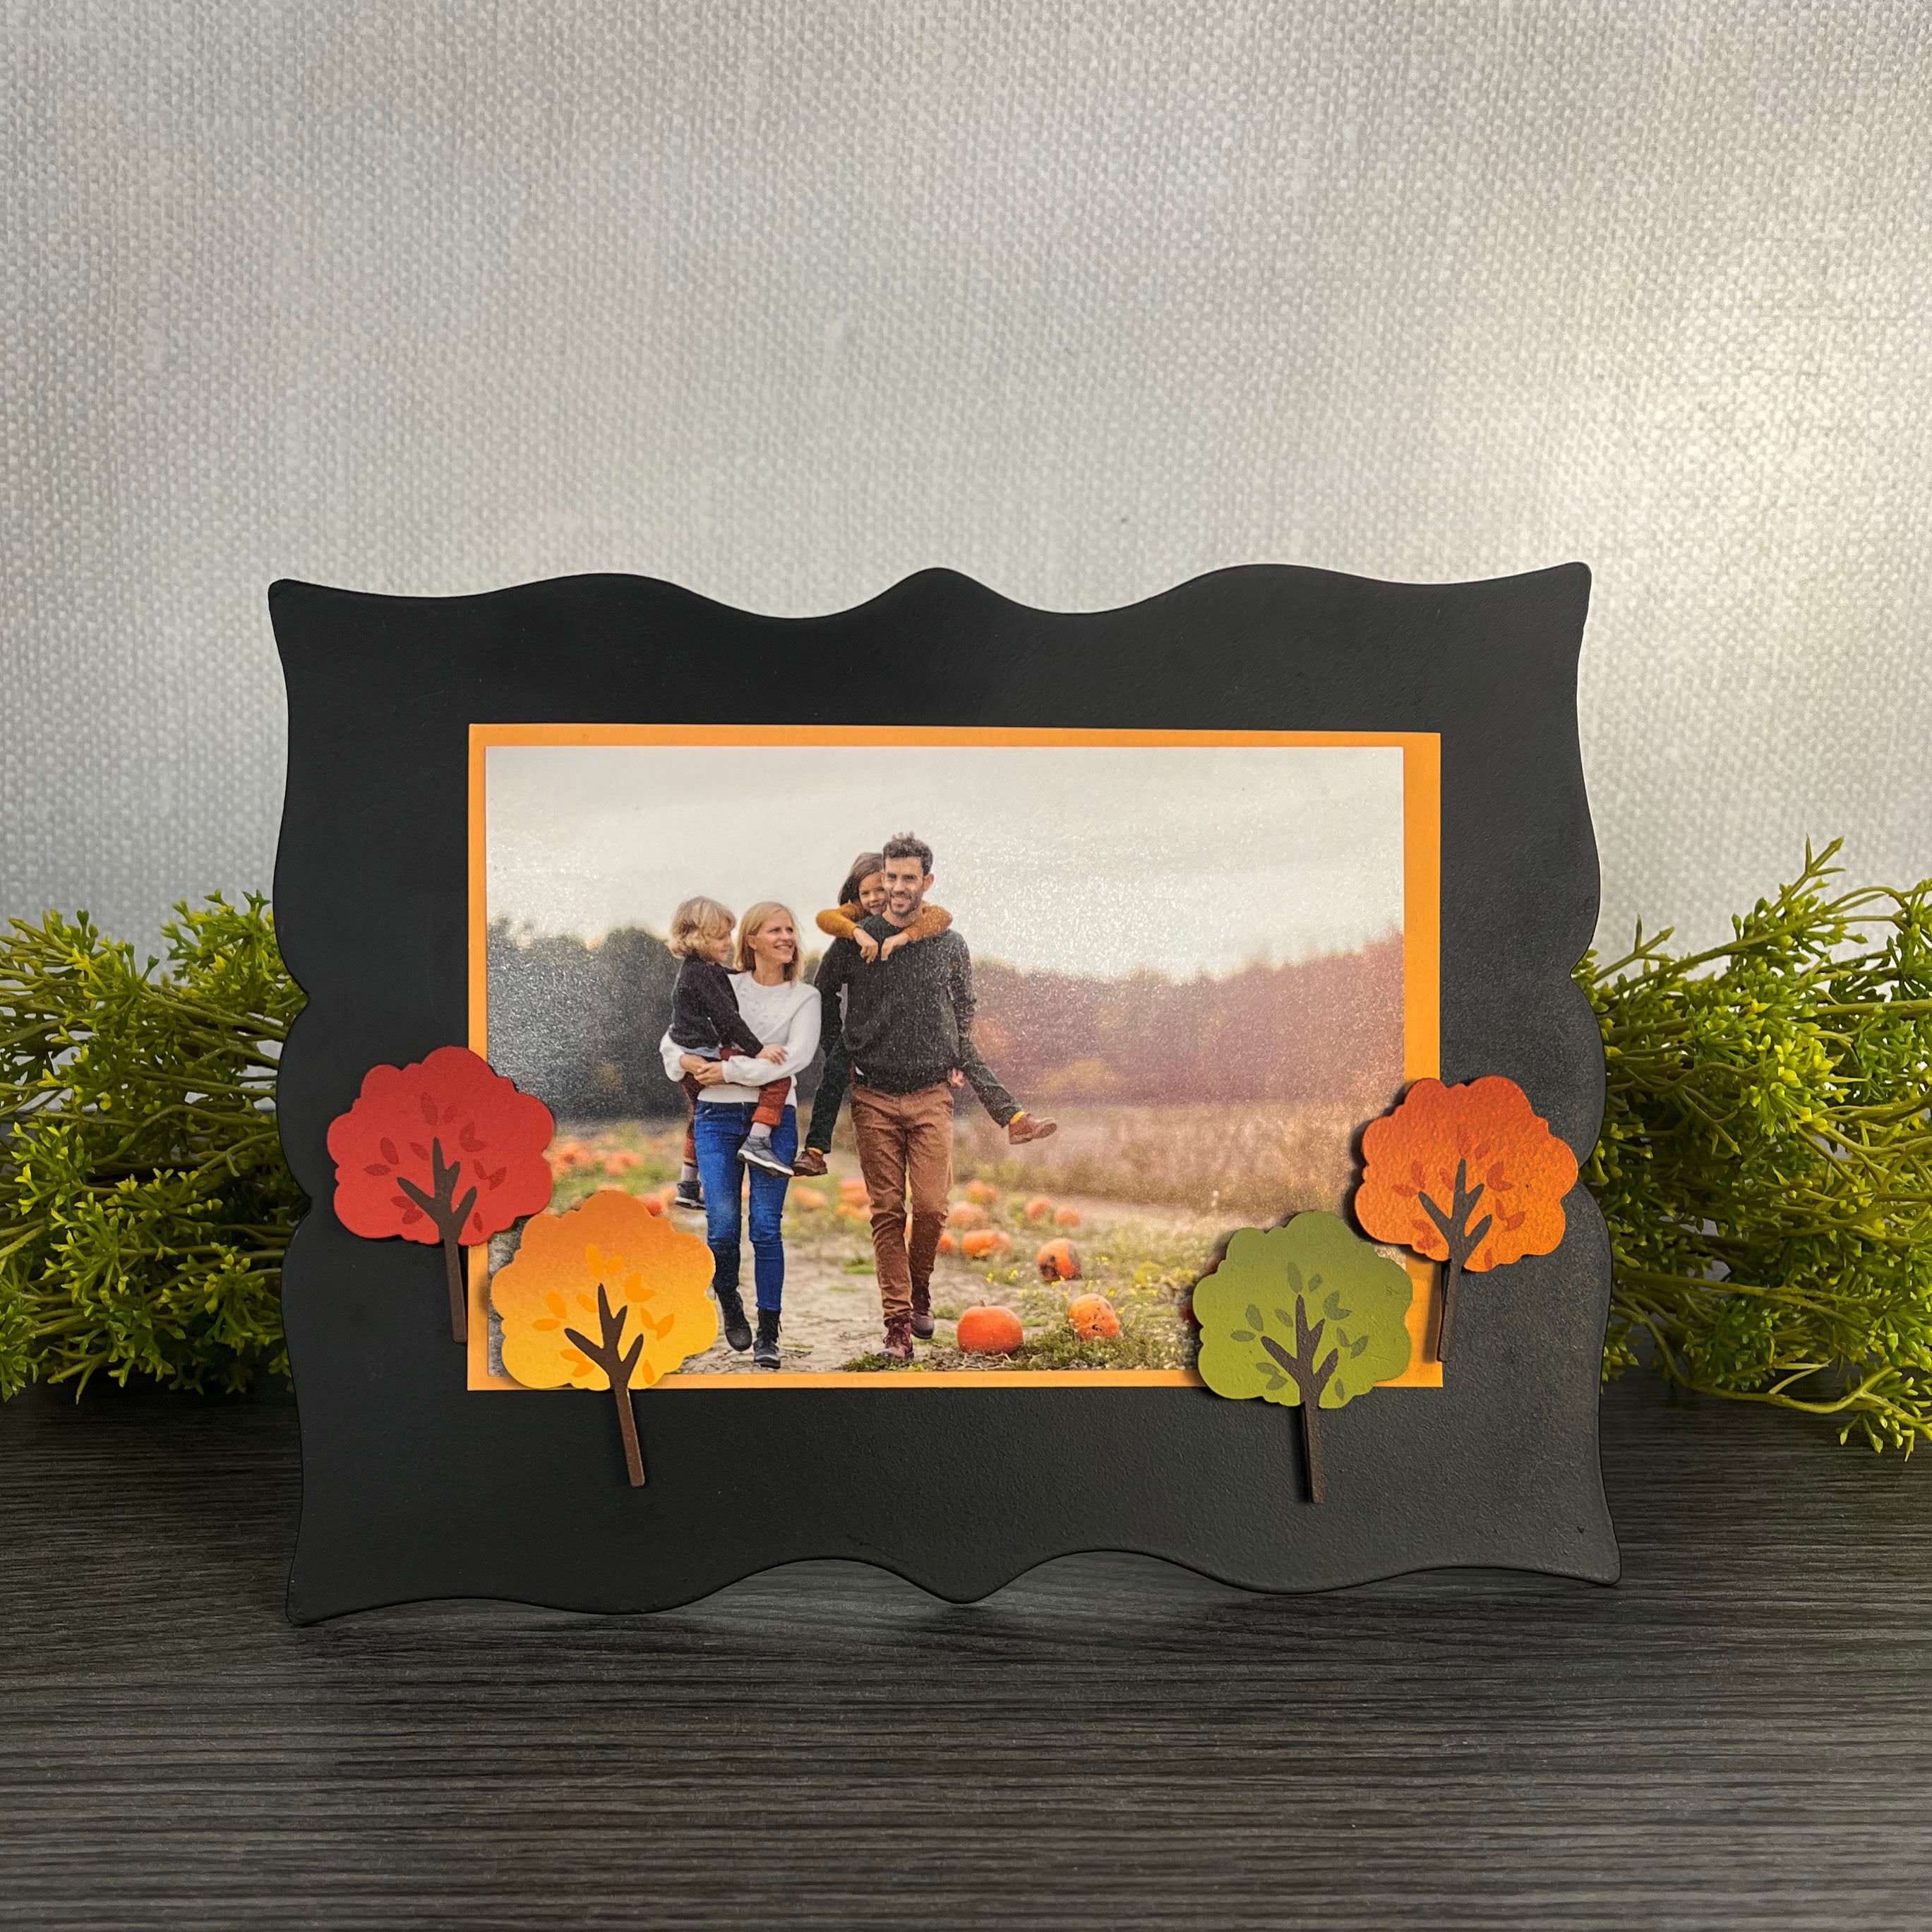 Fall Tree Magnets S/4